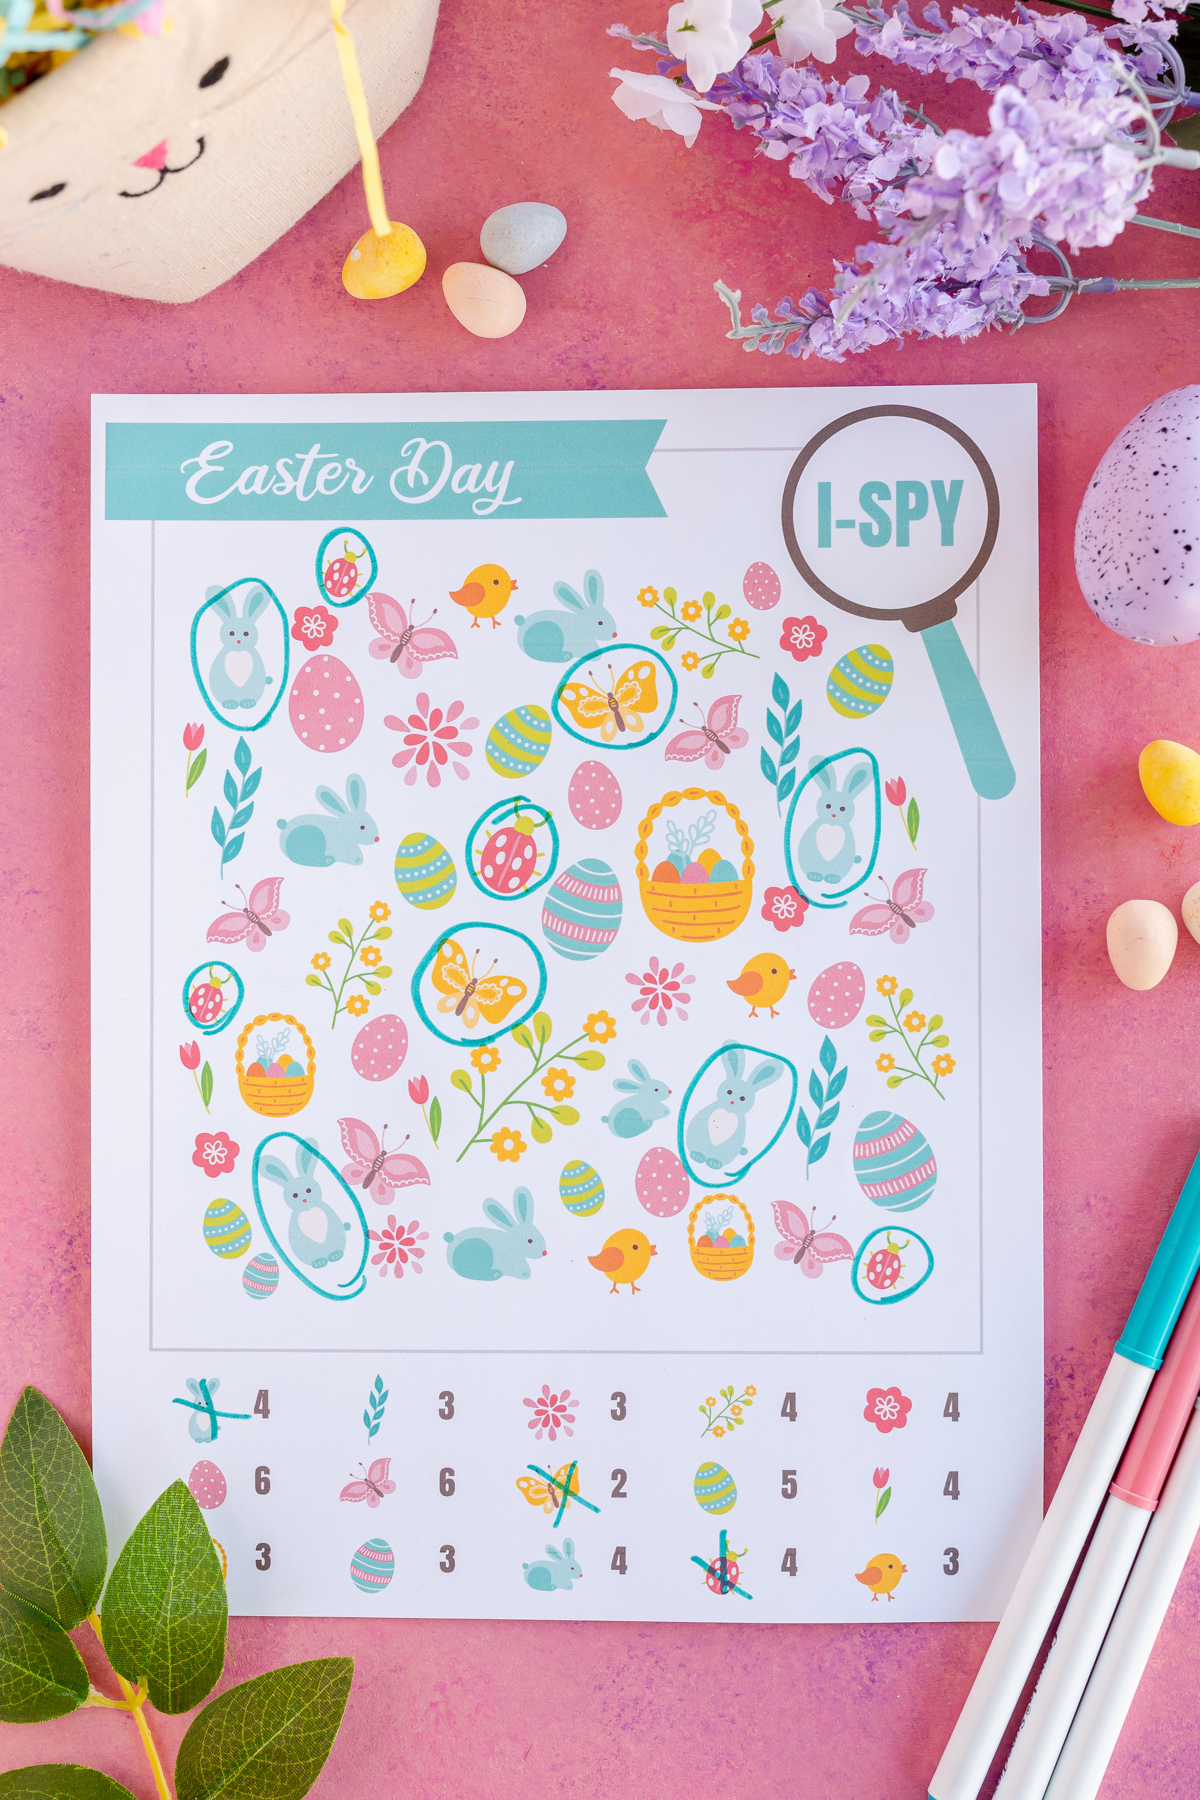 printed out i spy Easter sheet